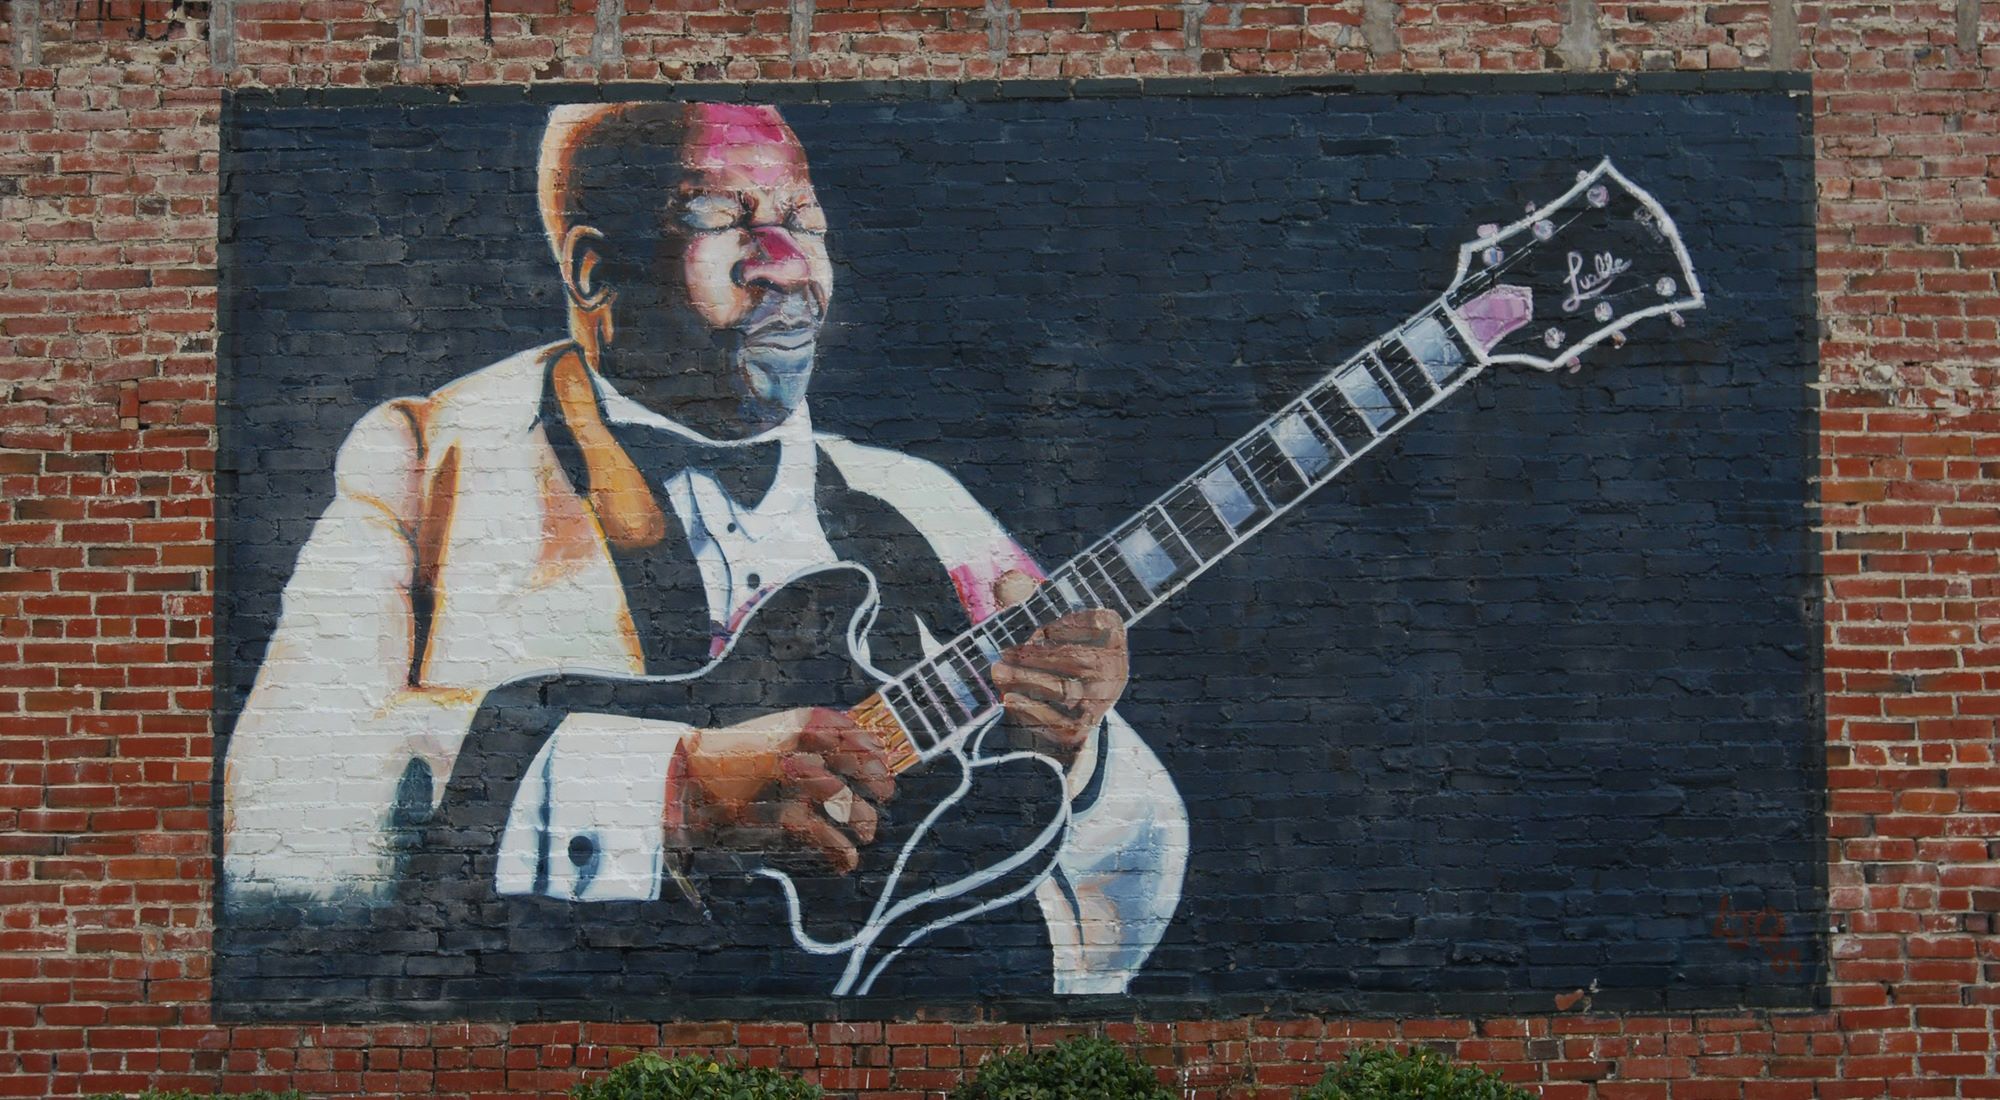 BB King Mural Indianola Mississippi